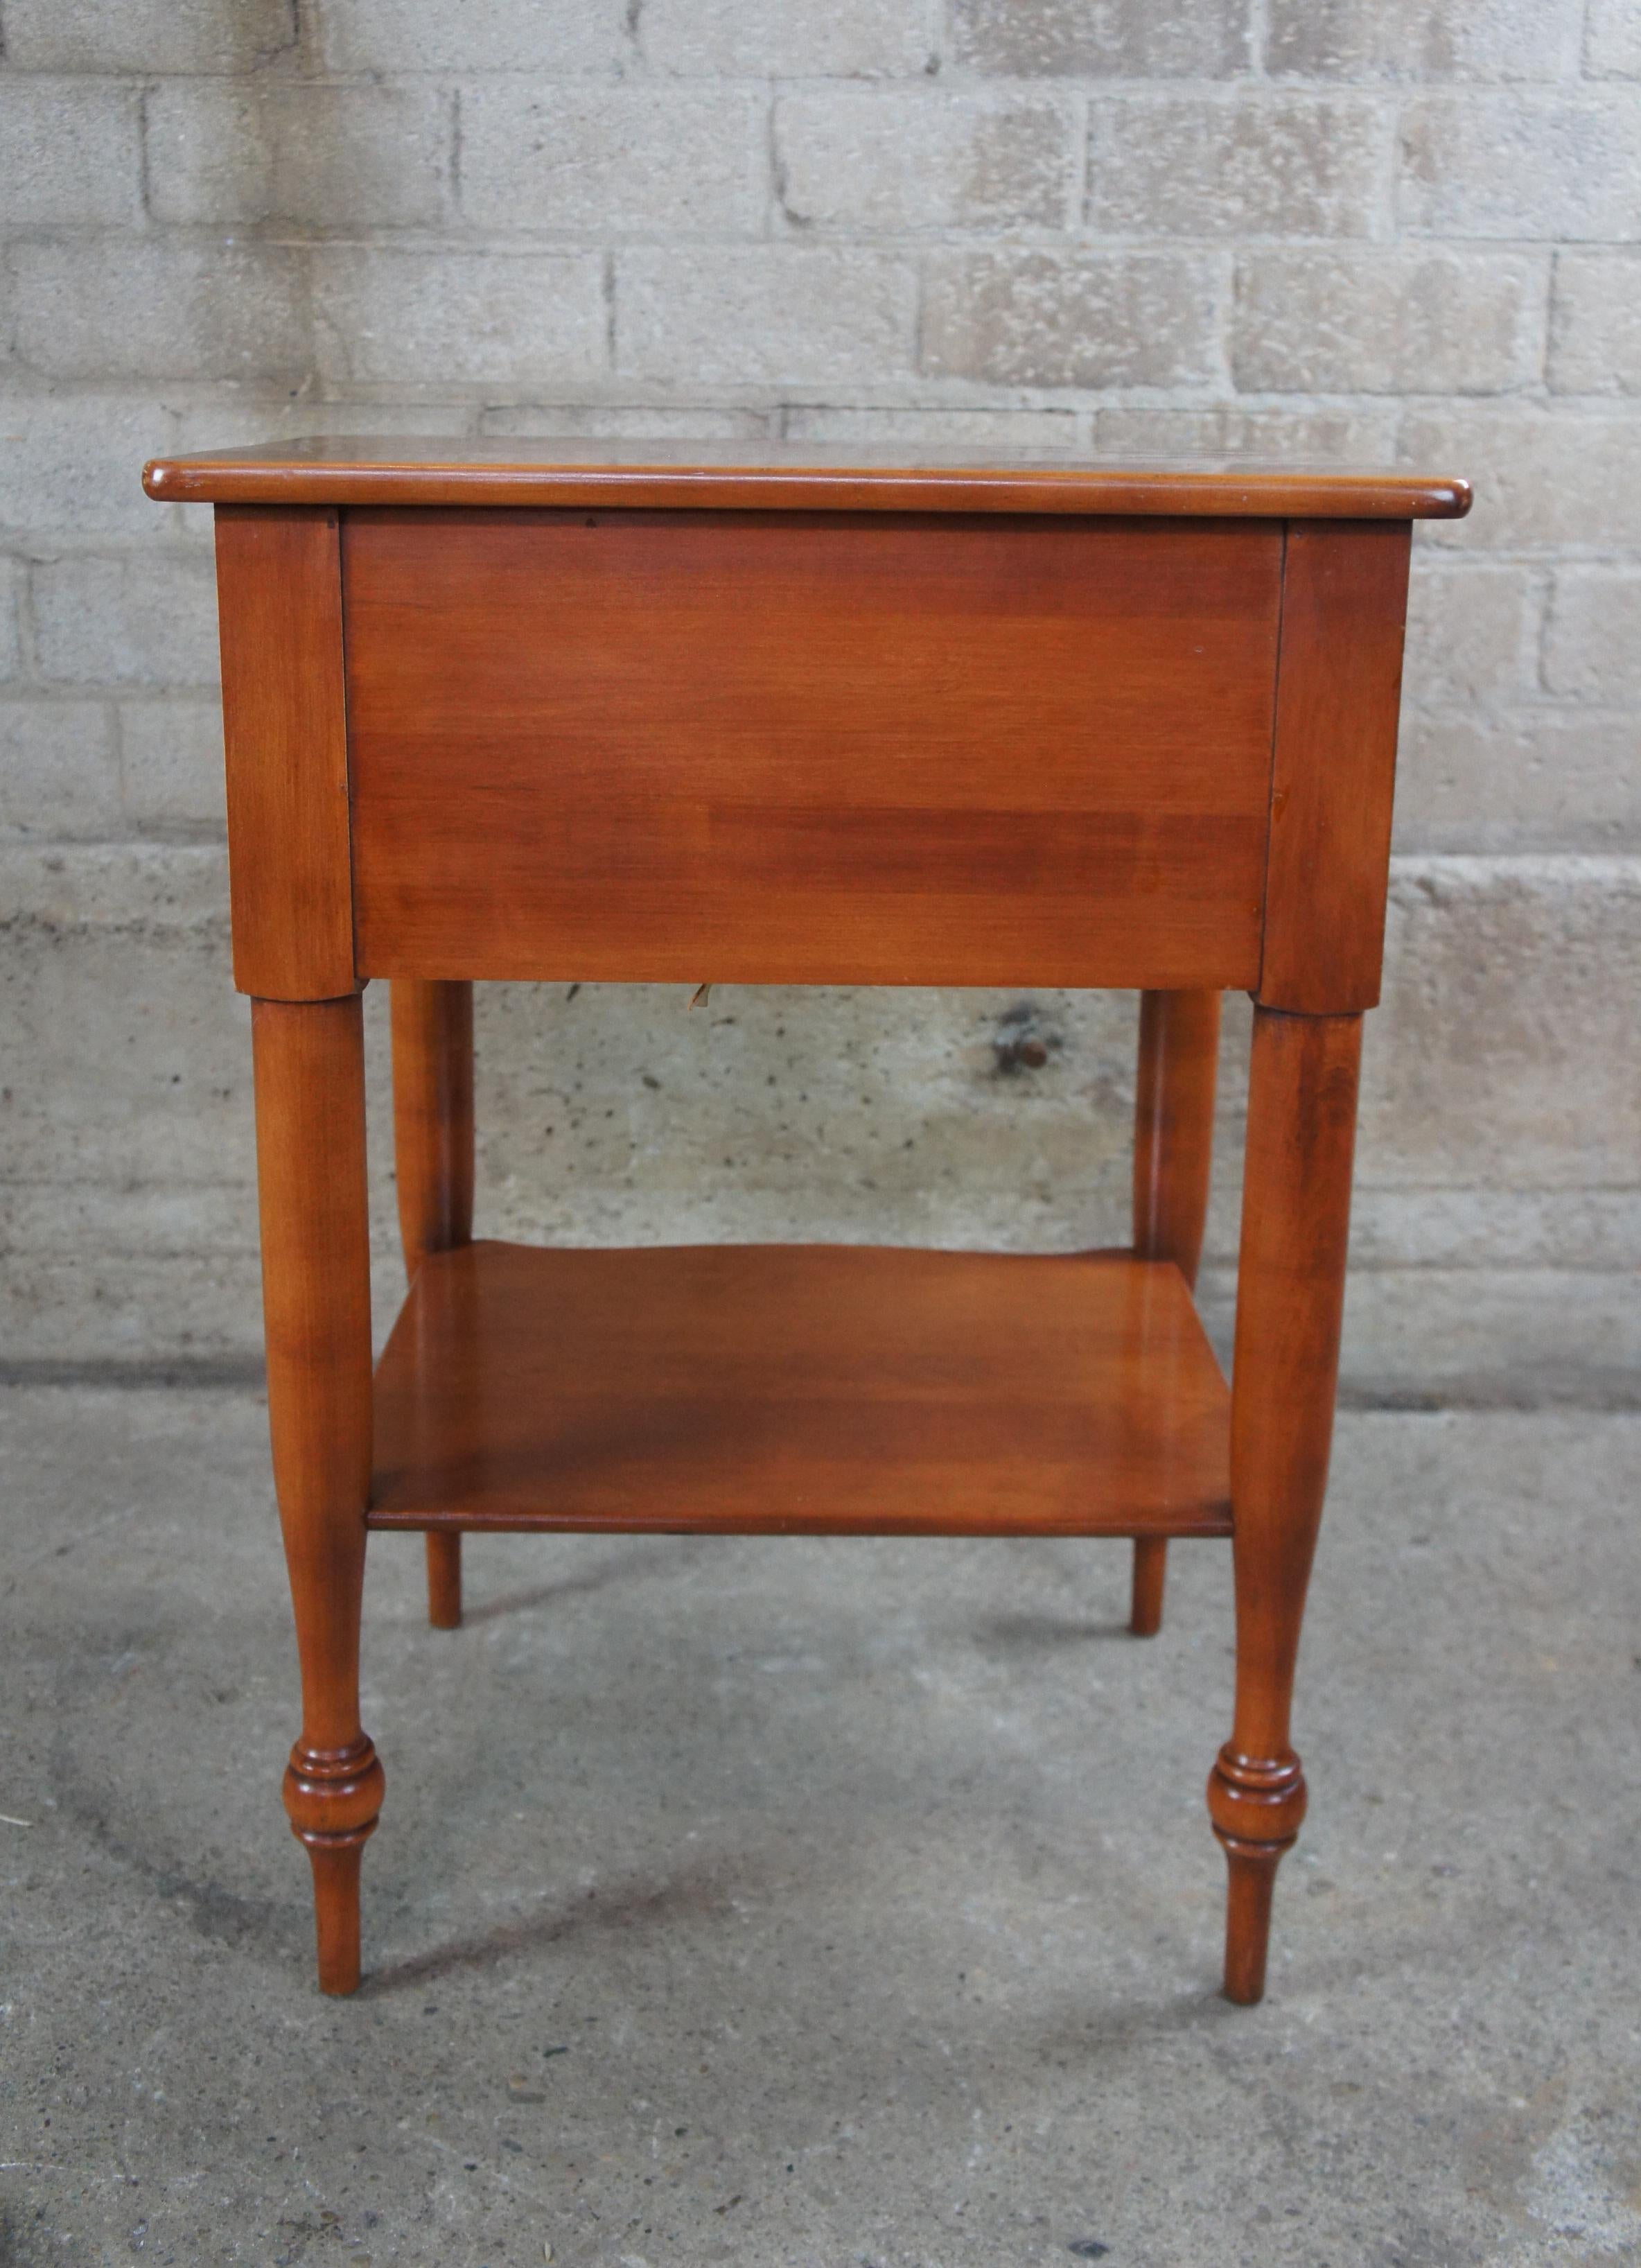 Vintage Willett Maple Nightstand 2-Drawer Early American Country Side Table 1